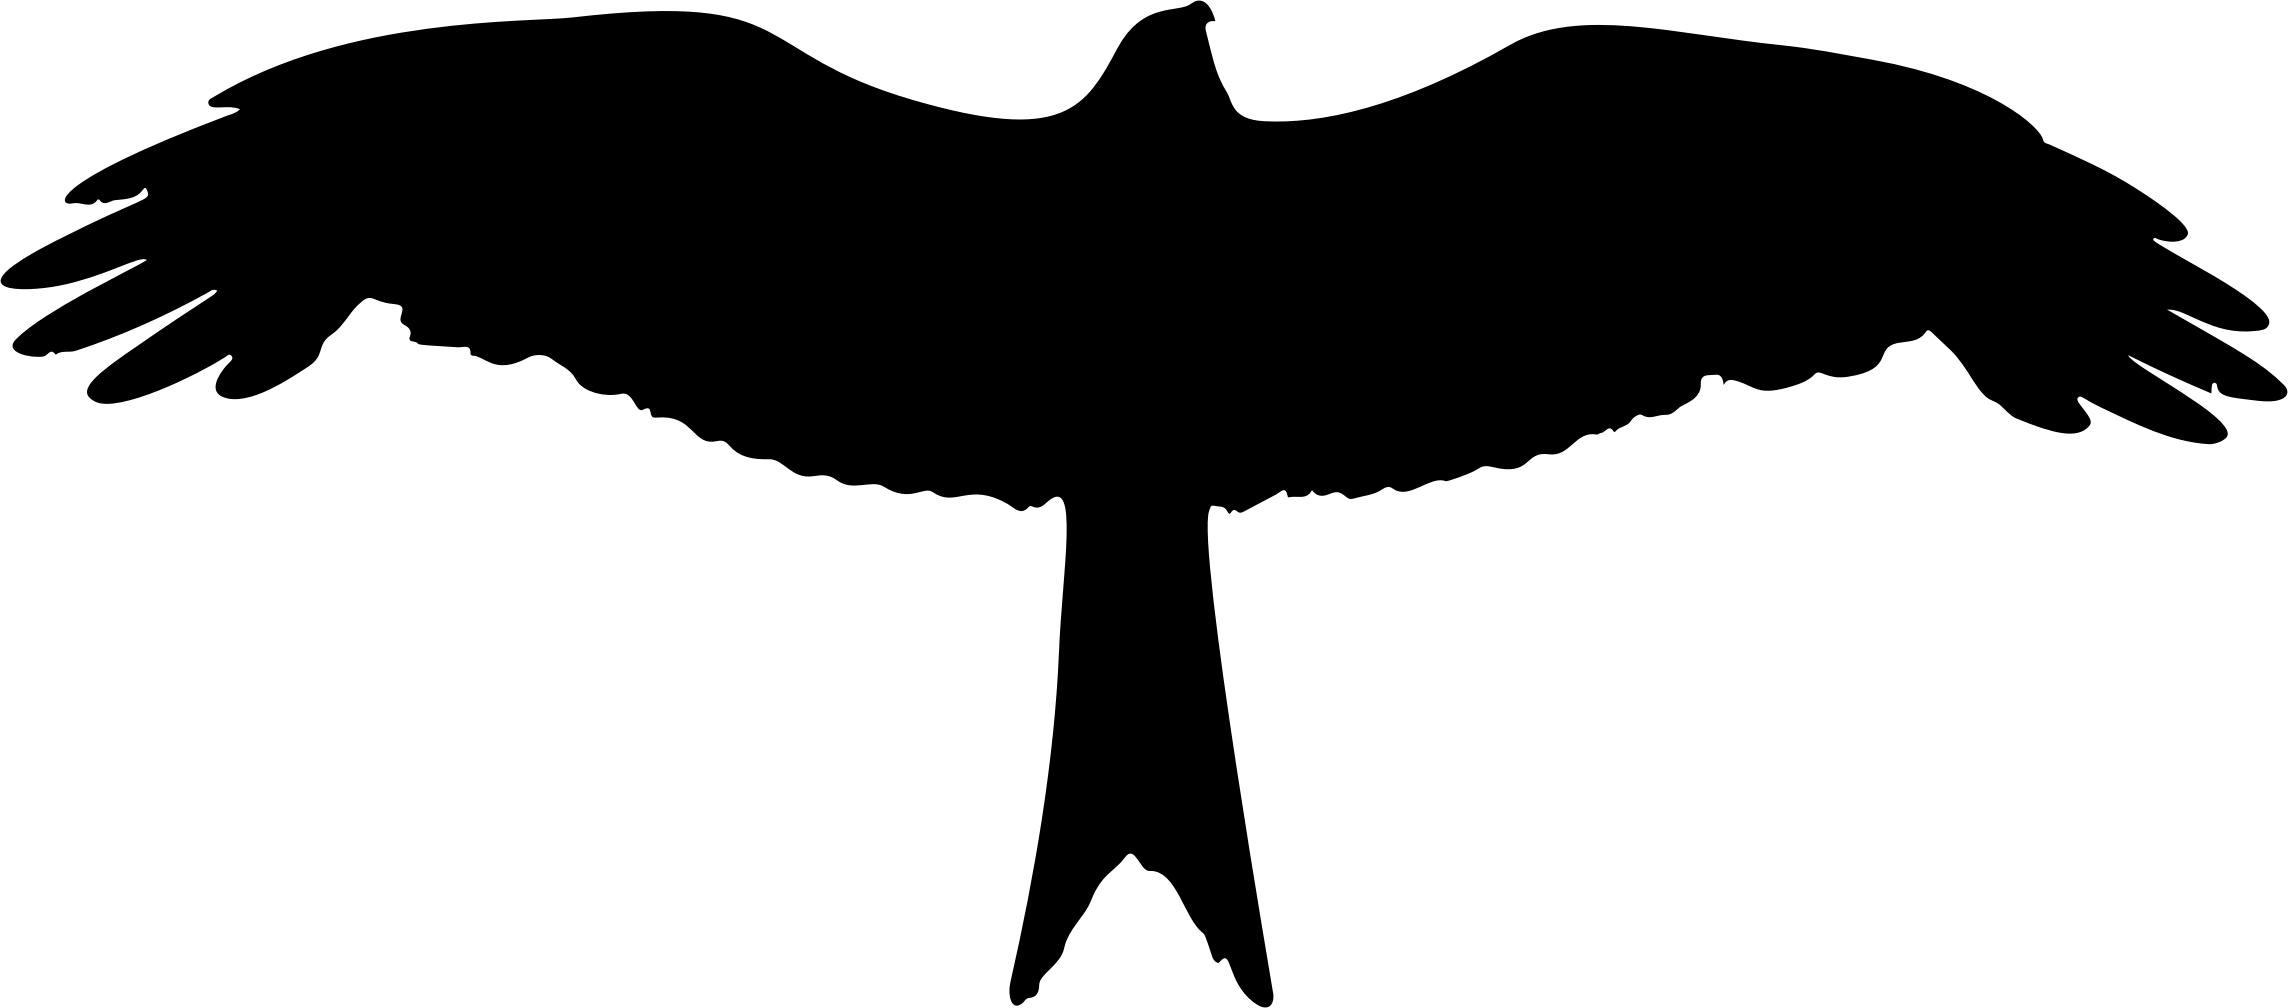 Eagle silhouette 2 png